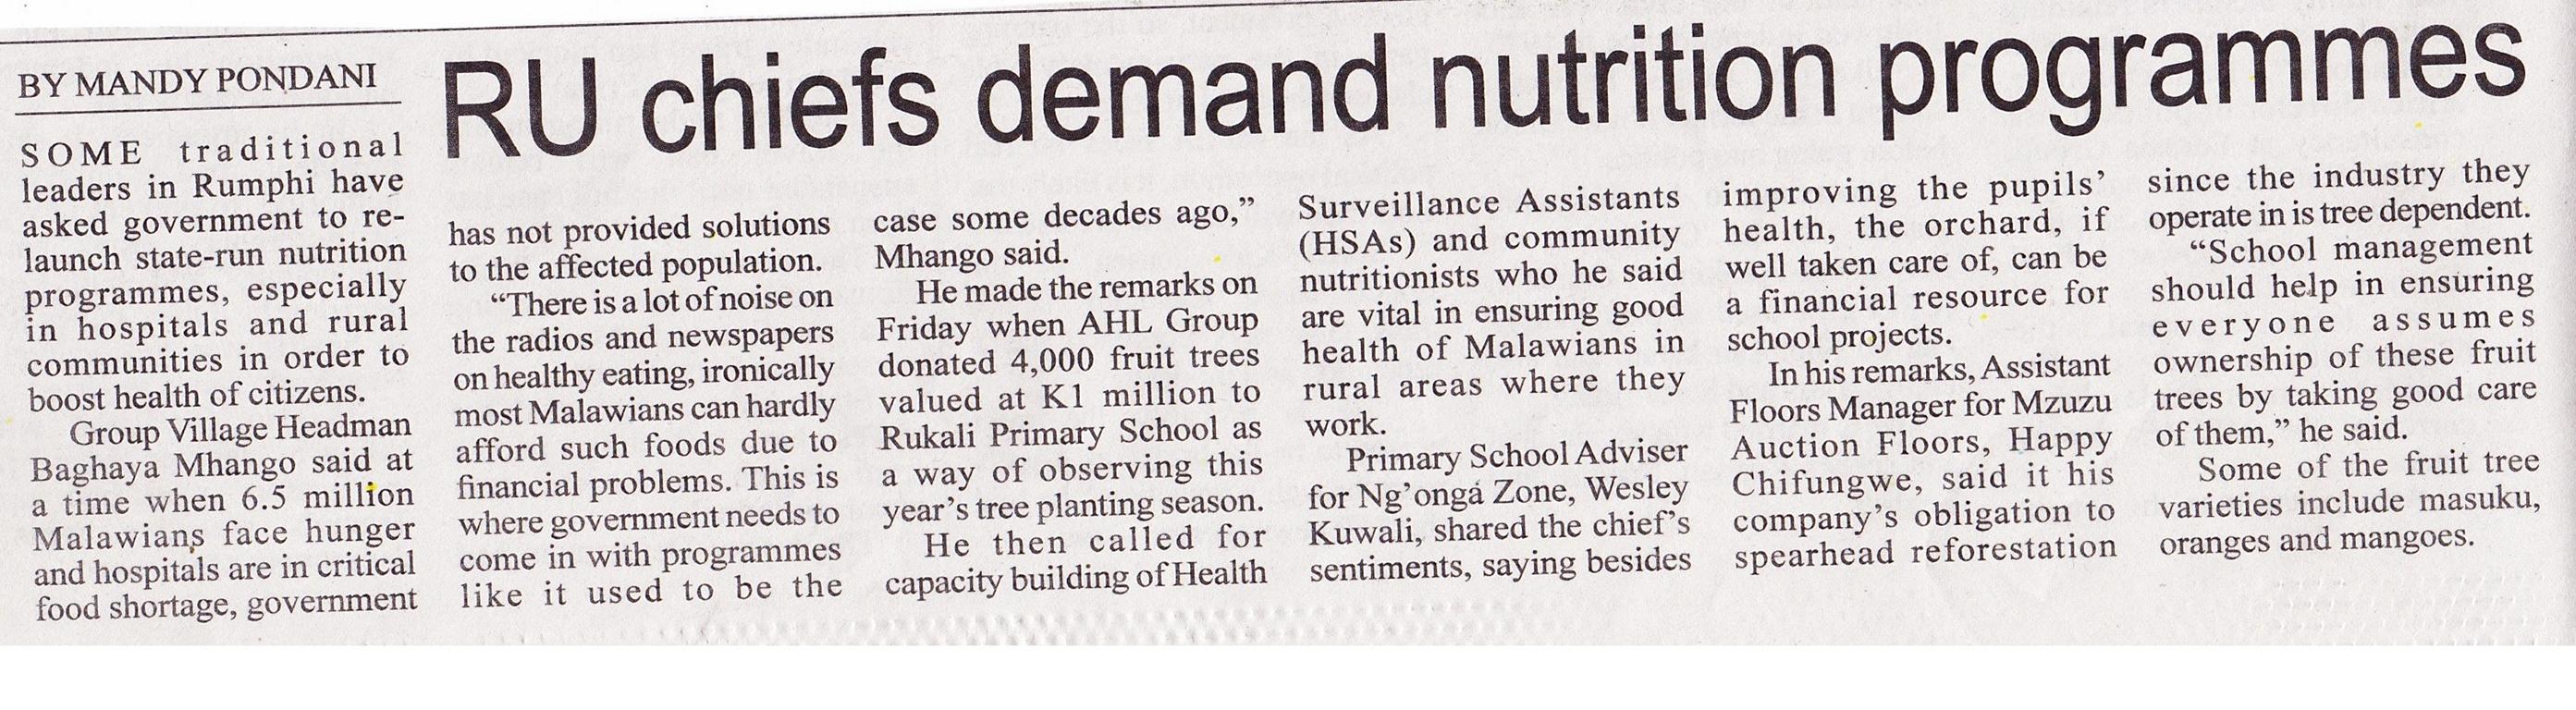 2017-02-06_RU chiefs demand nutrition programmes_The Daily Times.png